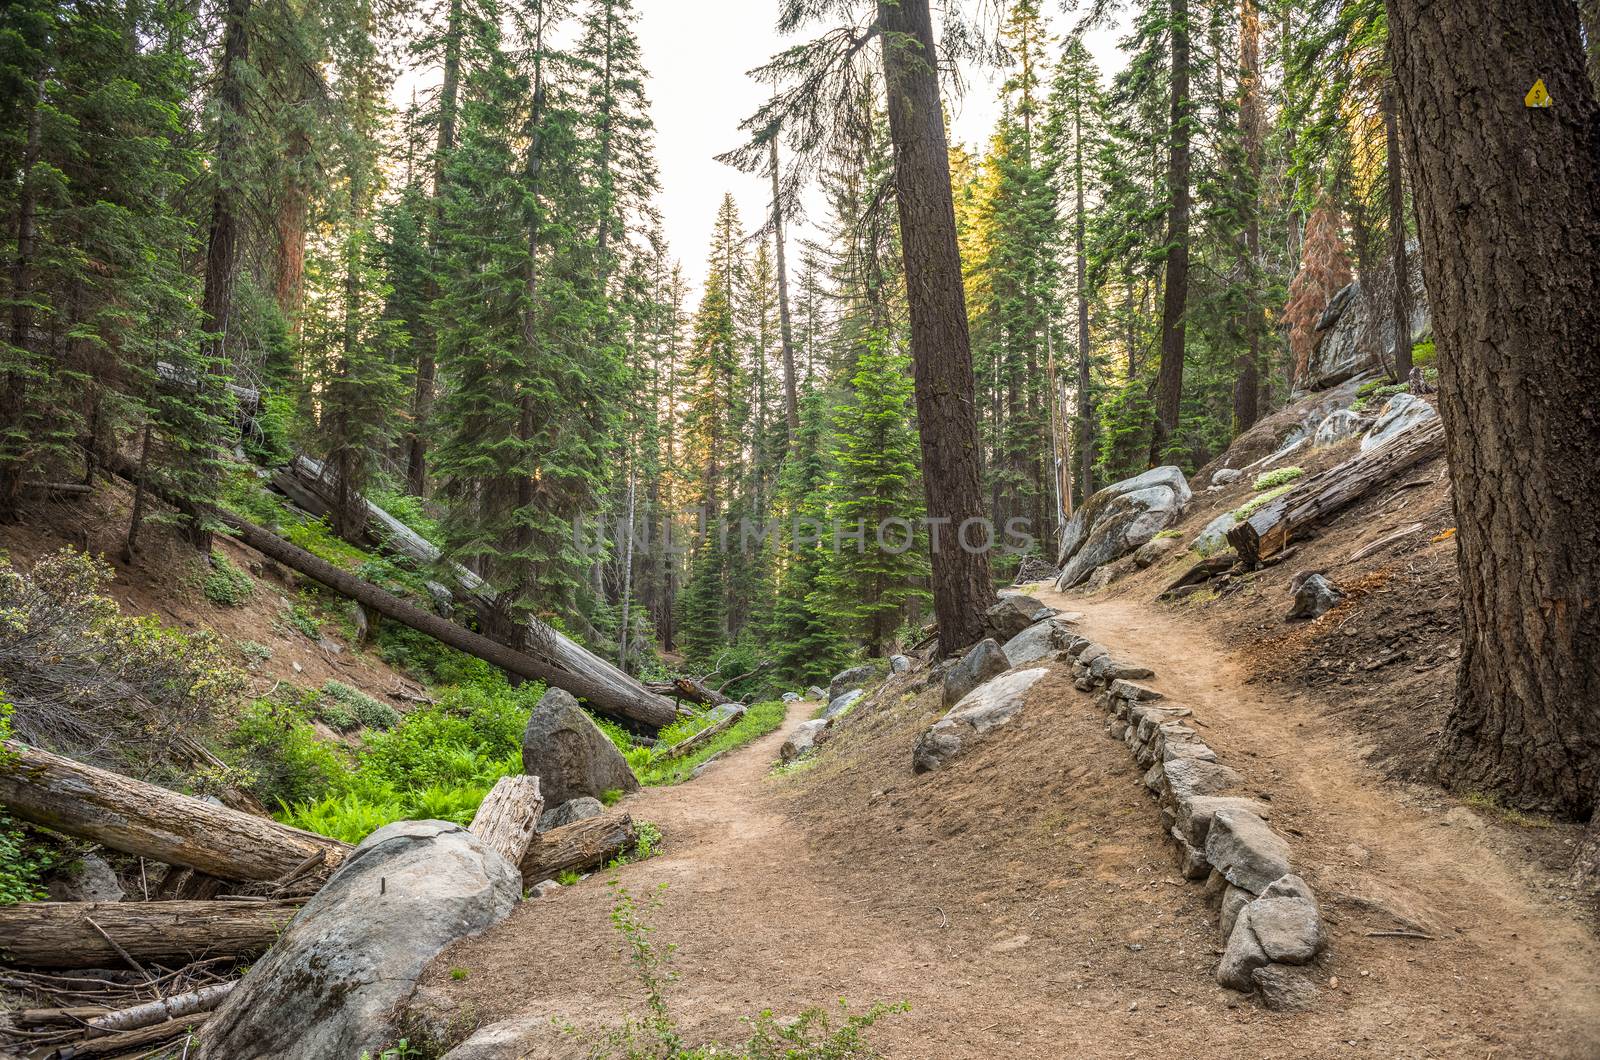 Sunset Rock trail in Sequoia National Park, California